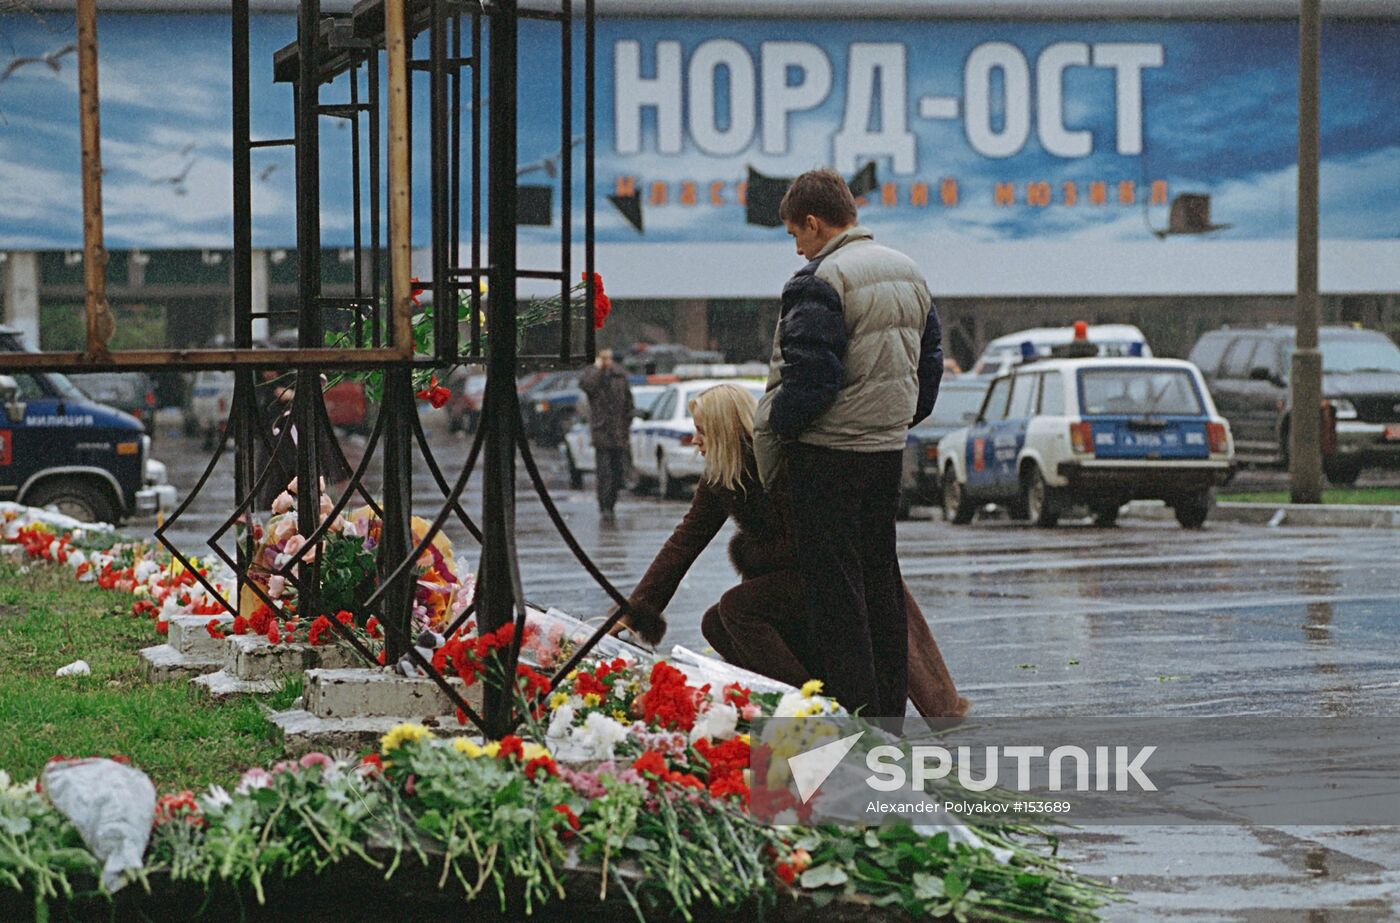 DUBROVKA TERRORIST ATTACK FLOWERS LAYING